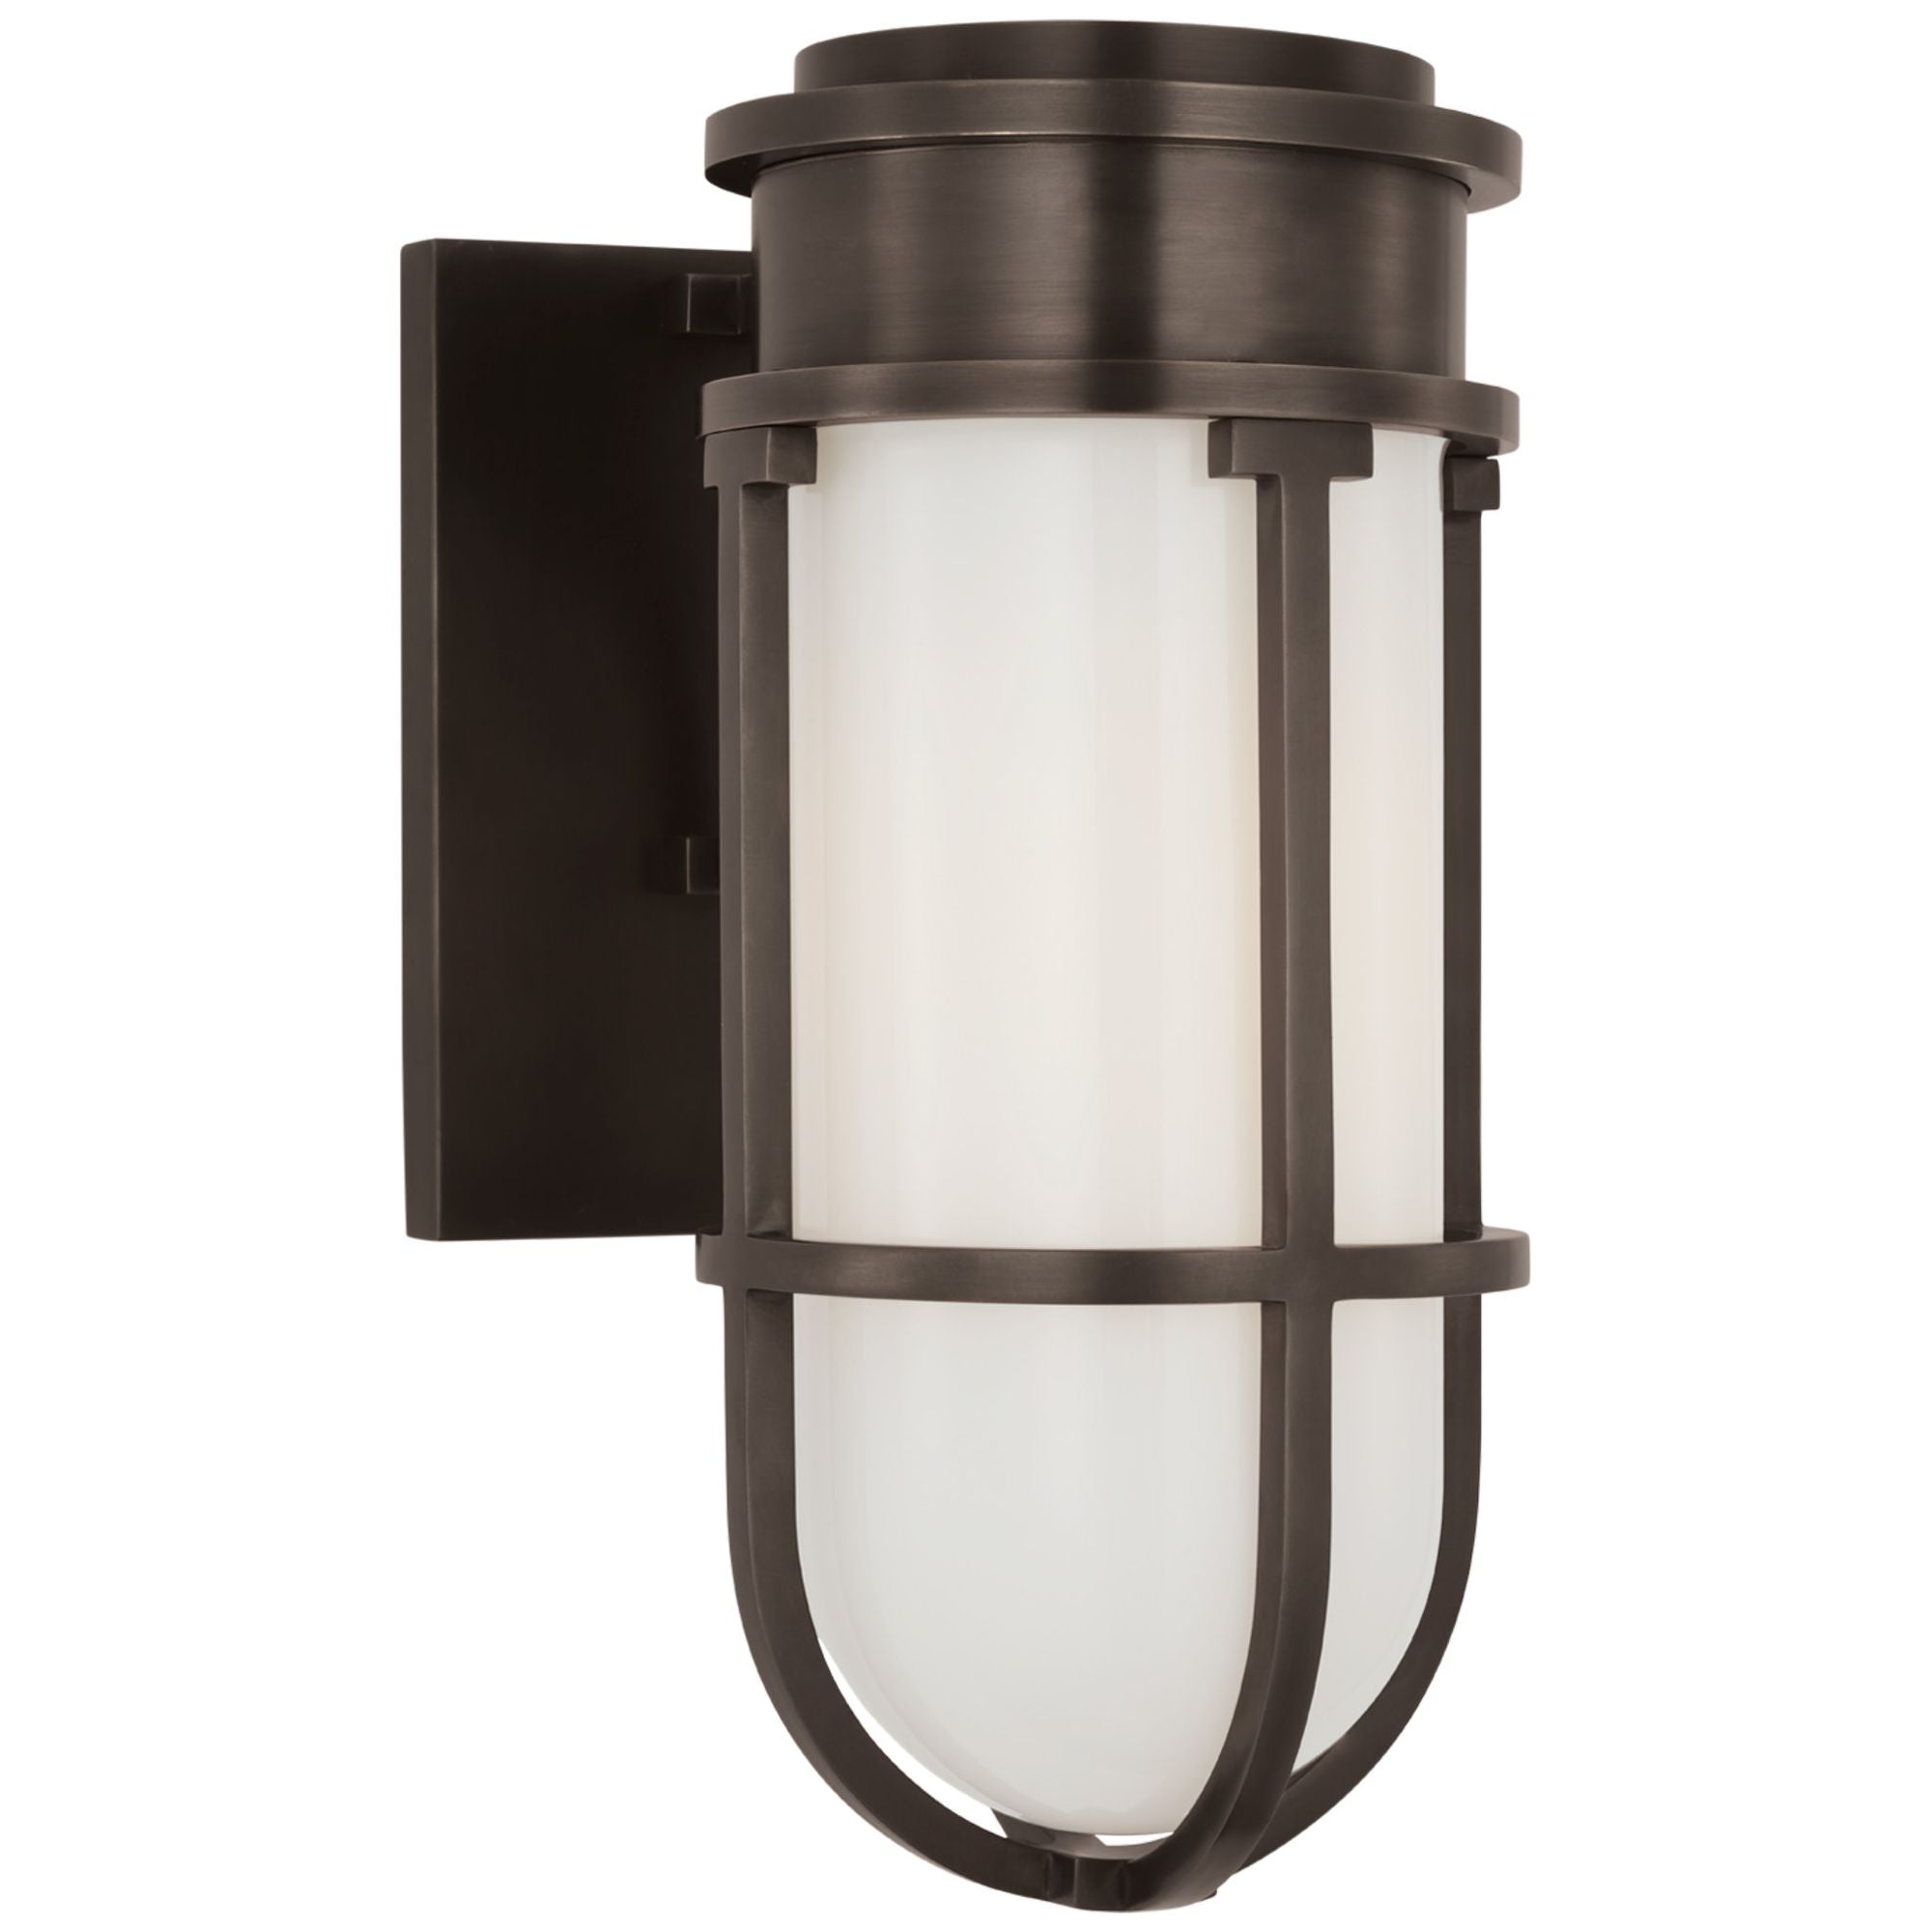 Chapman & Myers Gracie Tall Bracketed Sconce in Bronze with White Glass